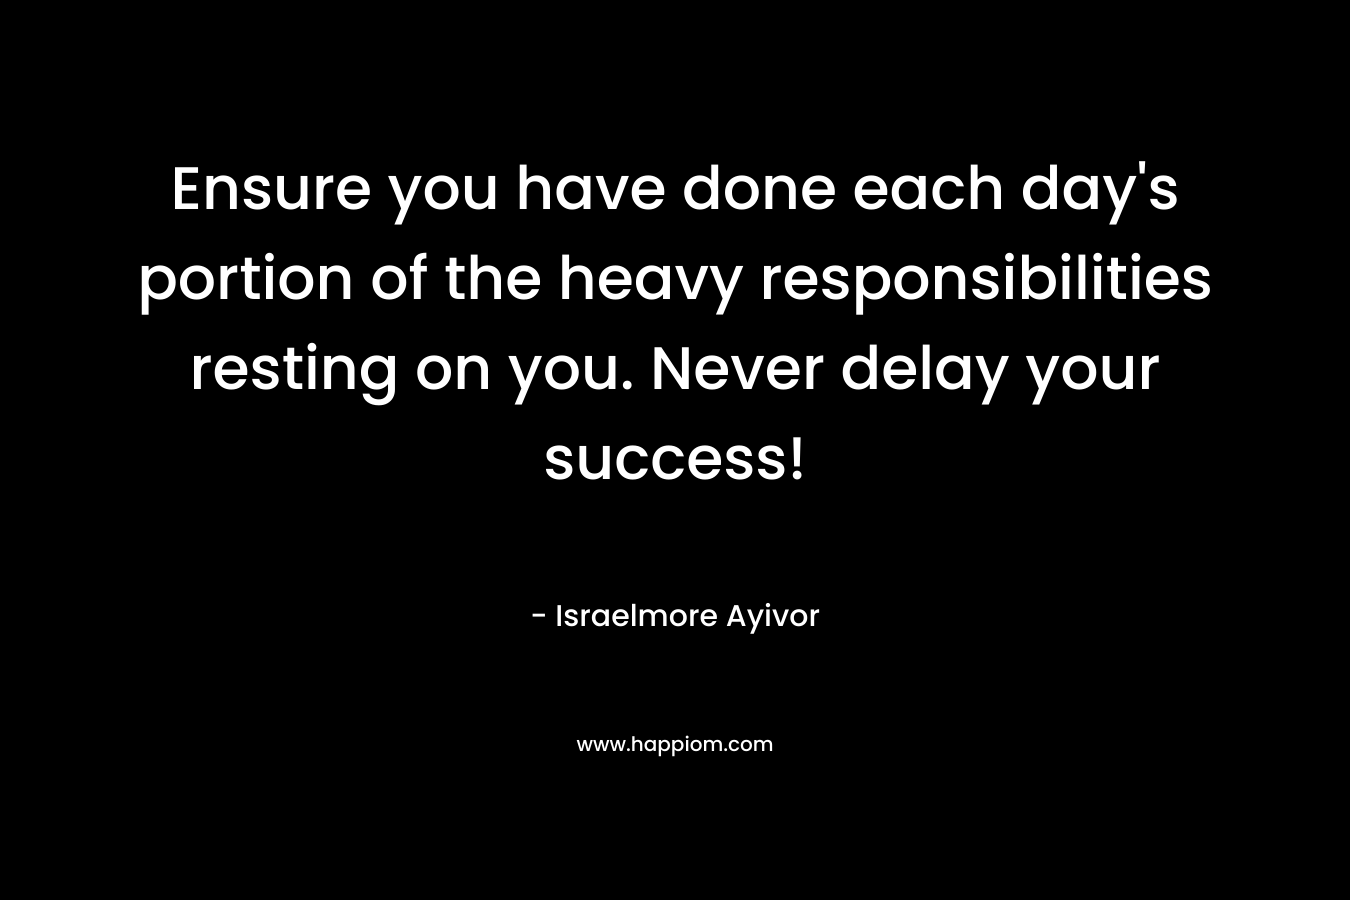 Ensure you have done each day’s portion of the heavy responsibilities resting on you. Never delay your success! – Israelmore Ayivor